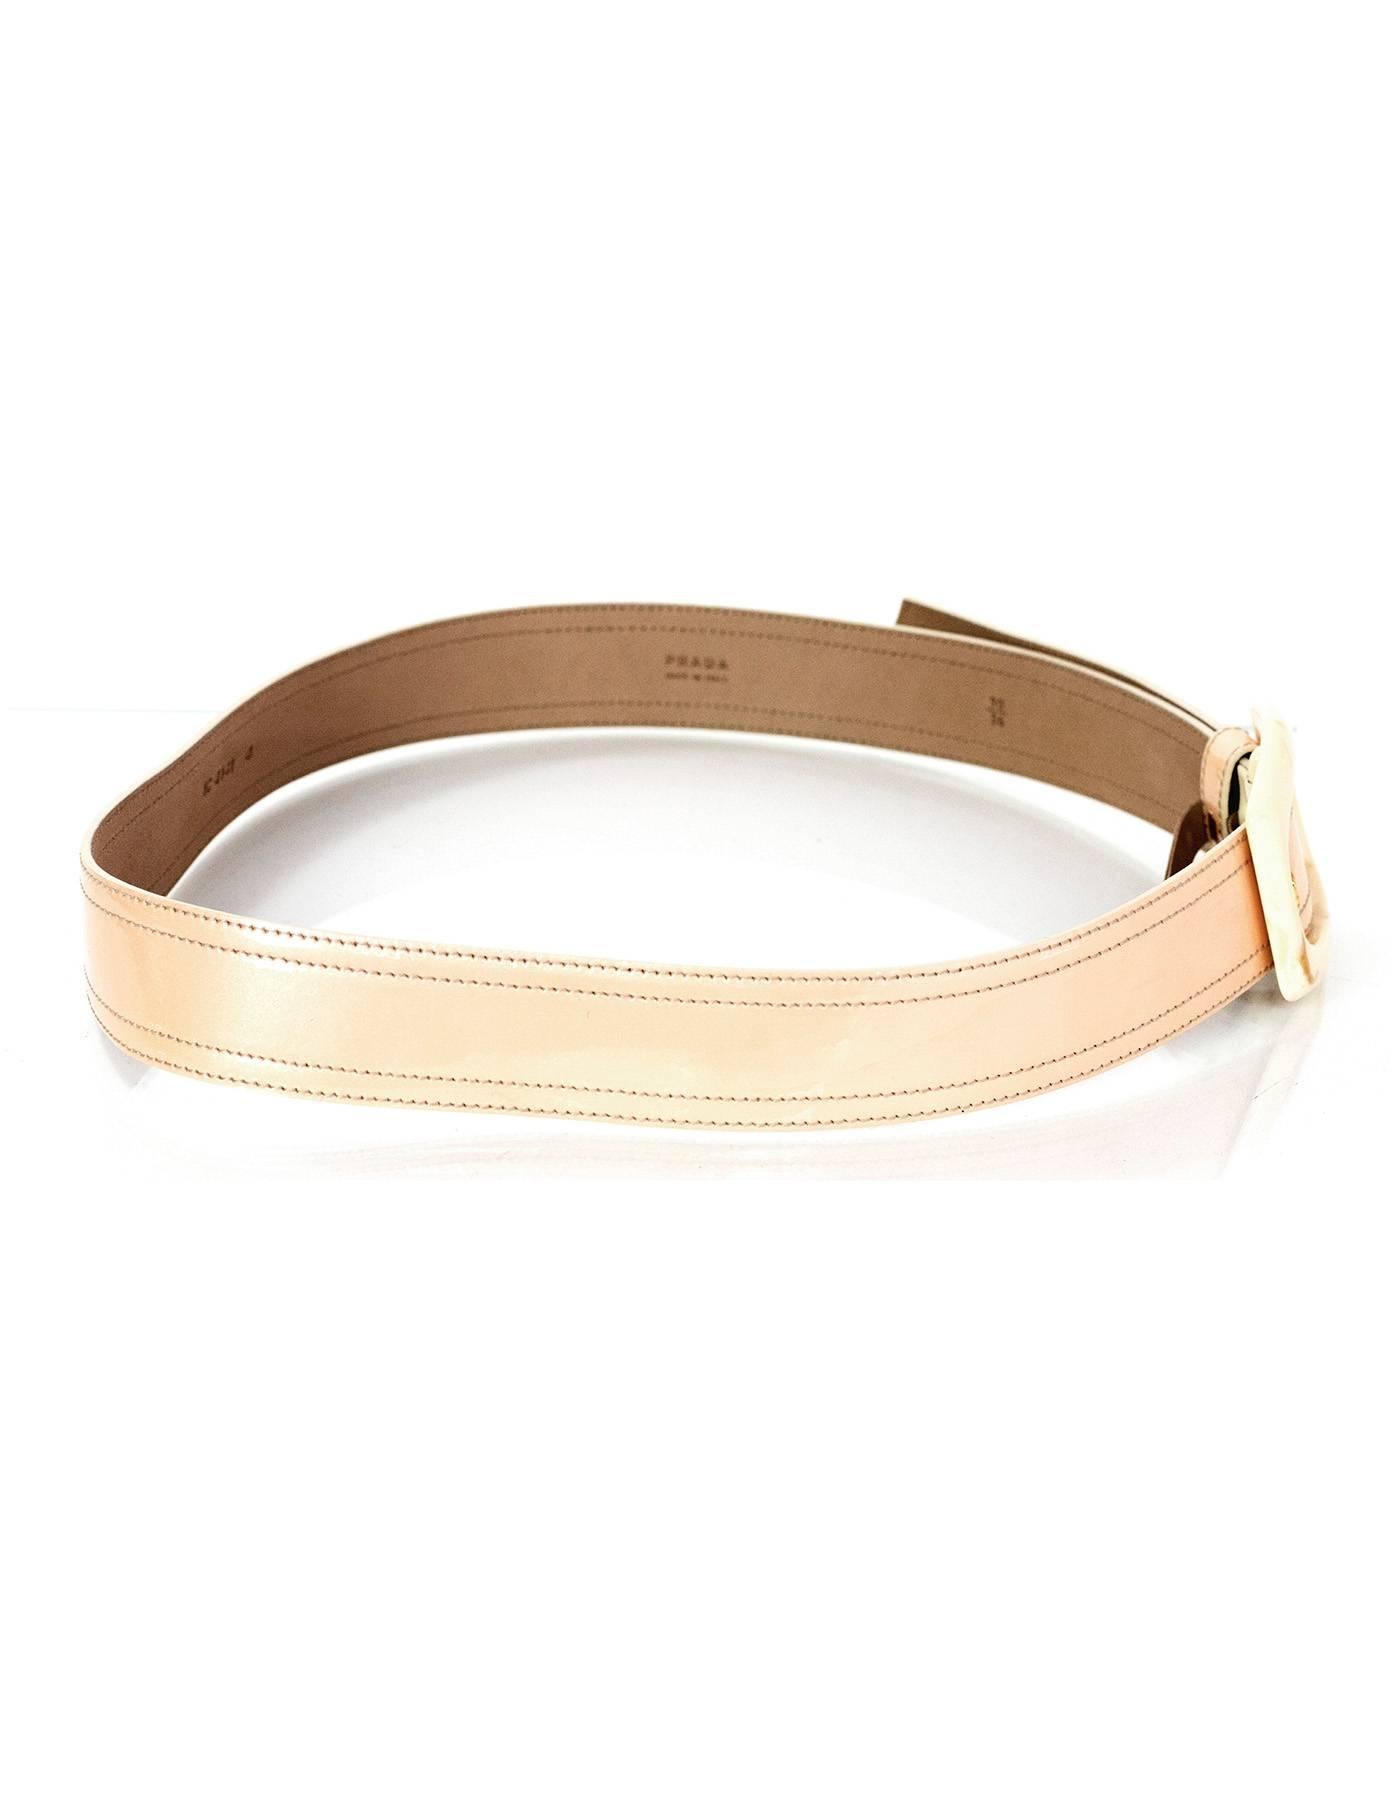 Prada Beige & Cream Patent Ombre Belt 
Features resin marble-style detailing on buckle

Made In: Italy
Color: Cream to beige ombre
Materials: Patent leather and resin
Closure/Opening: Buckle and notch closure
Stamp: 1C 4141 4
Overall Condition: